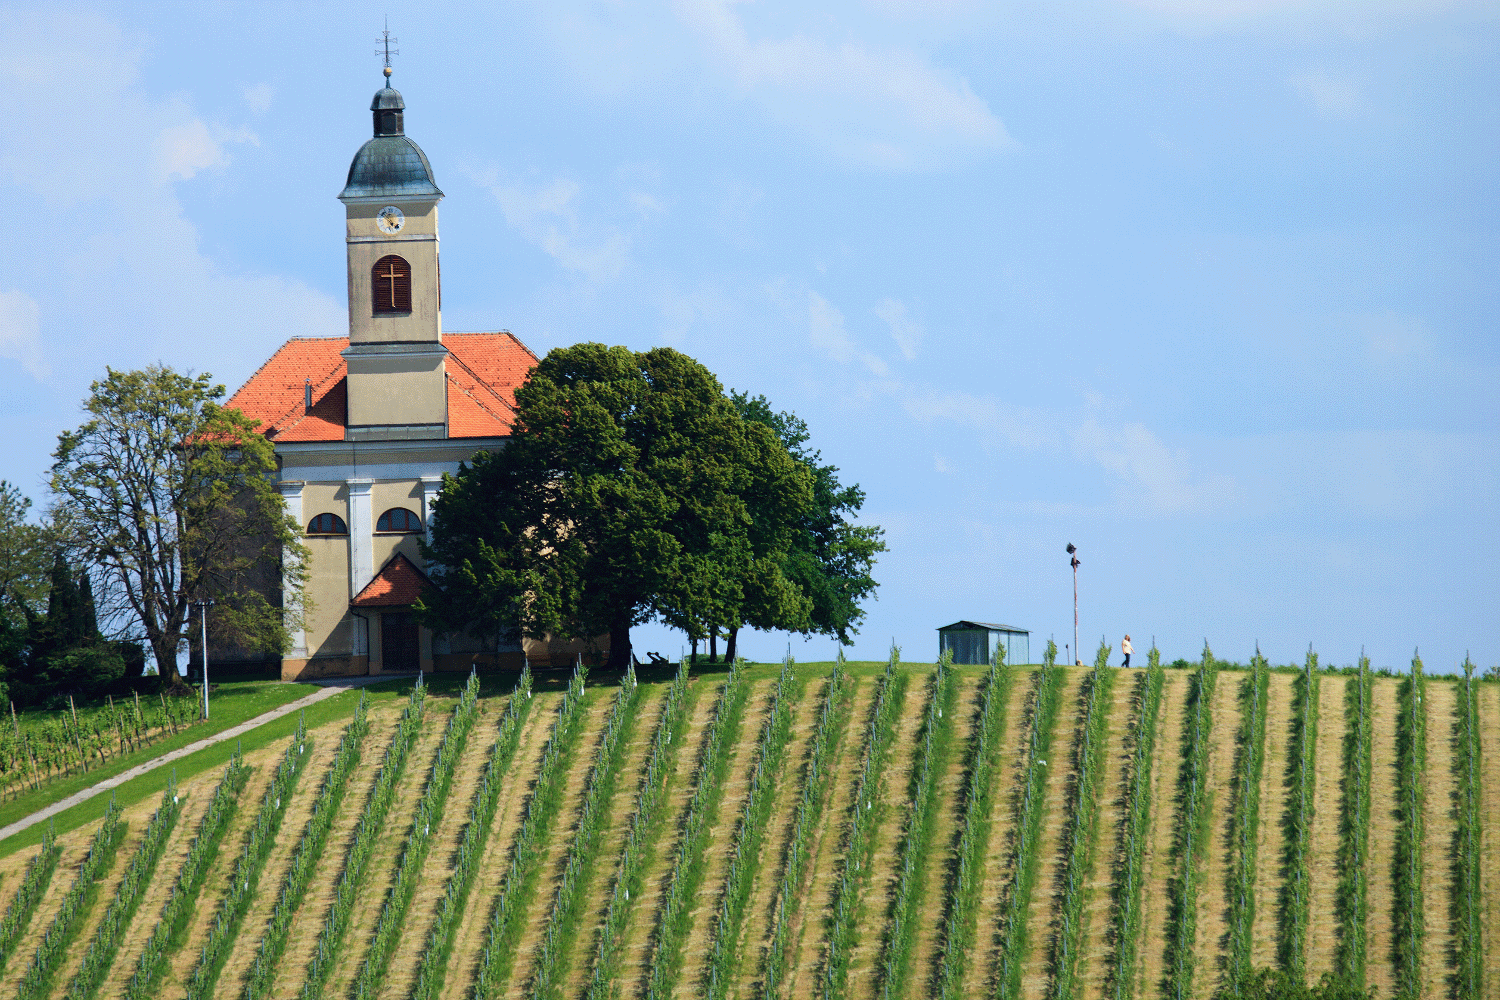 Slovenia’s agricultural prices rose by an average of 20% in October